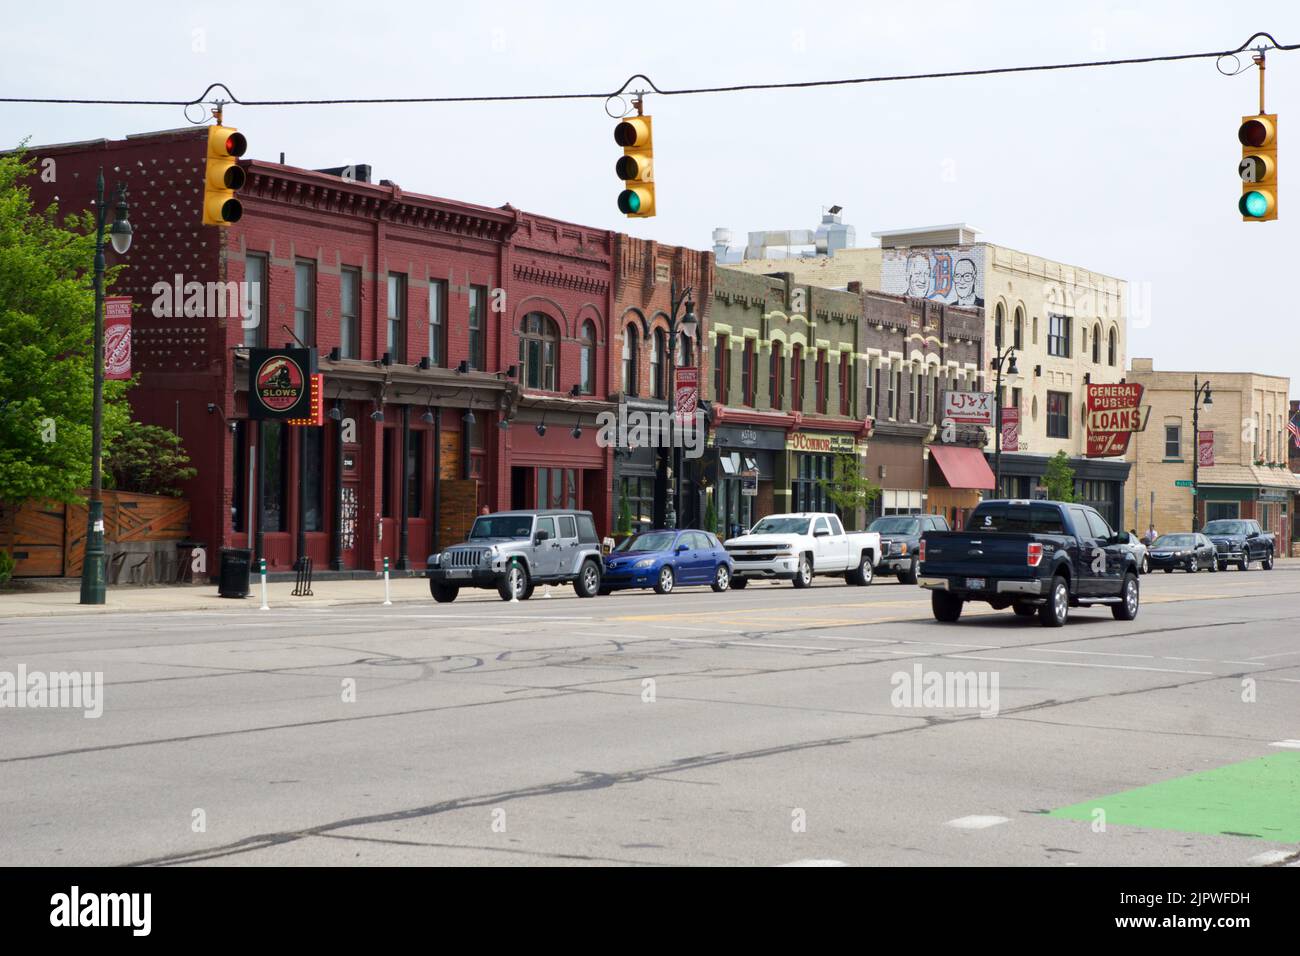 DETROIT, MICHIGAN, UNITED STATES - MAY 22, 2018: street with traffic lights, cars and low houses with stores in a suburb of Detroit Stock Photo